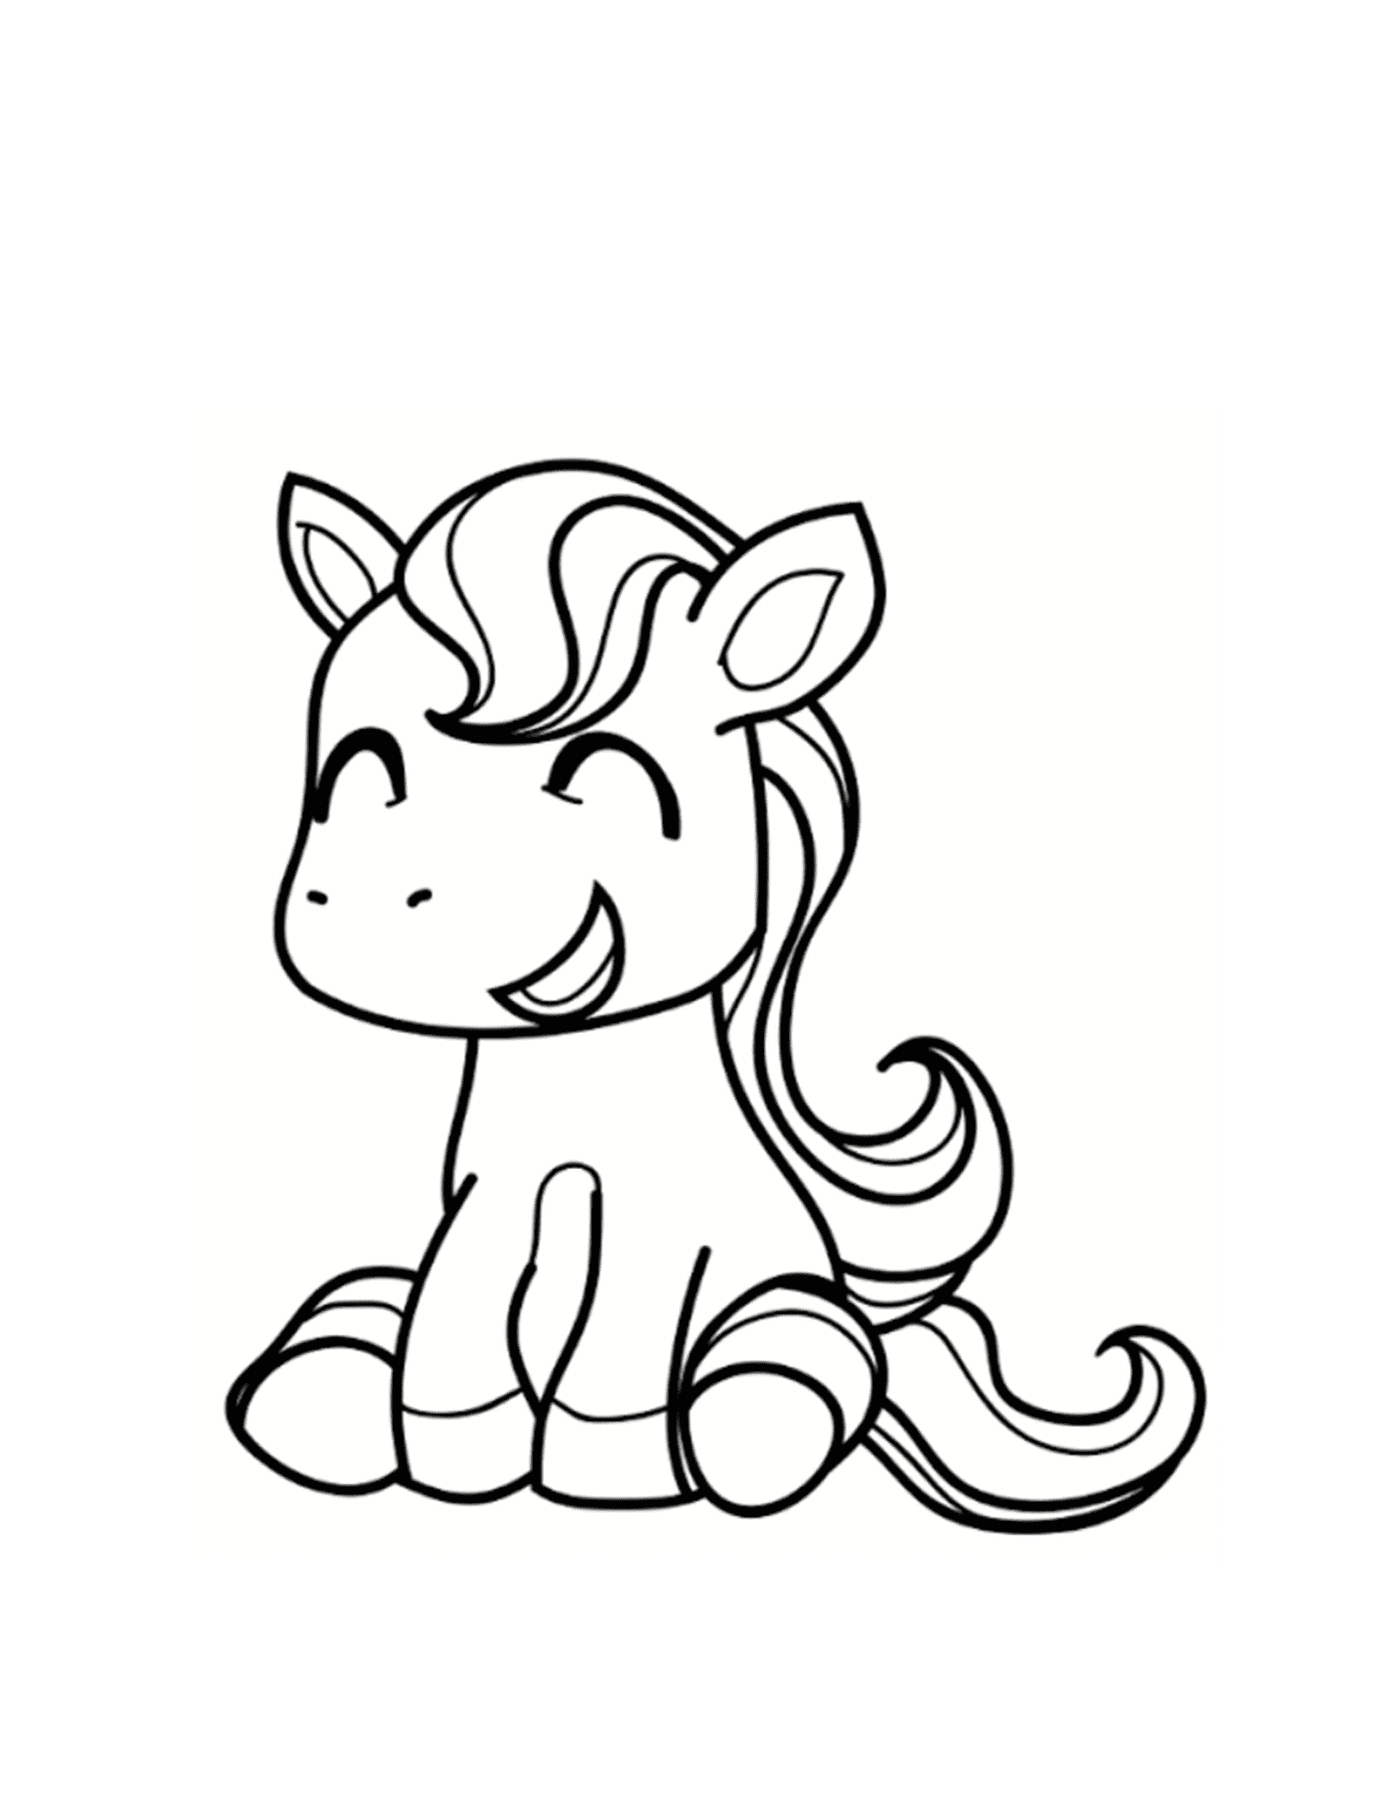  Pony smiling and cute 